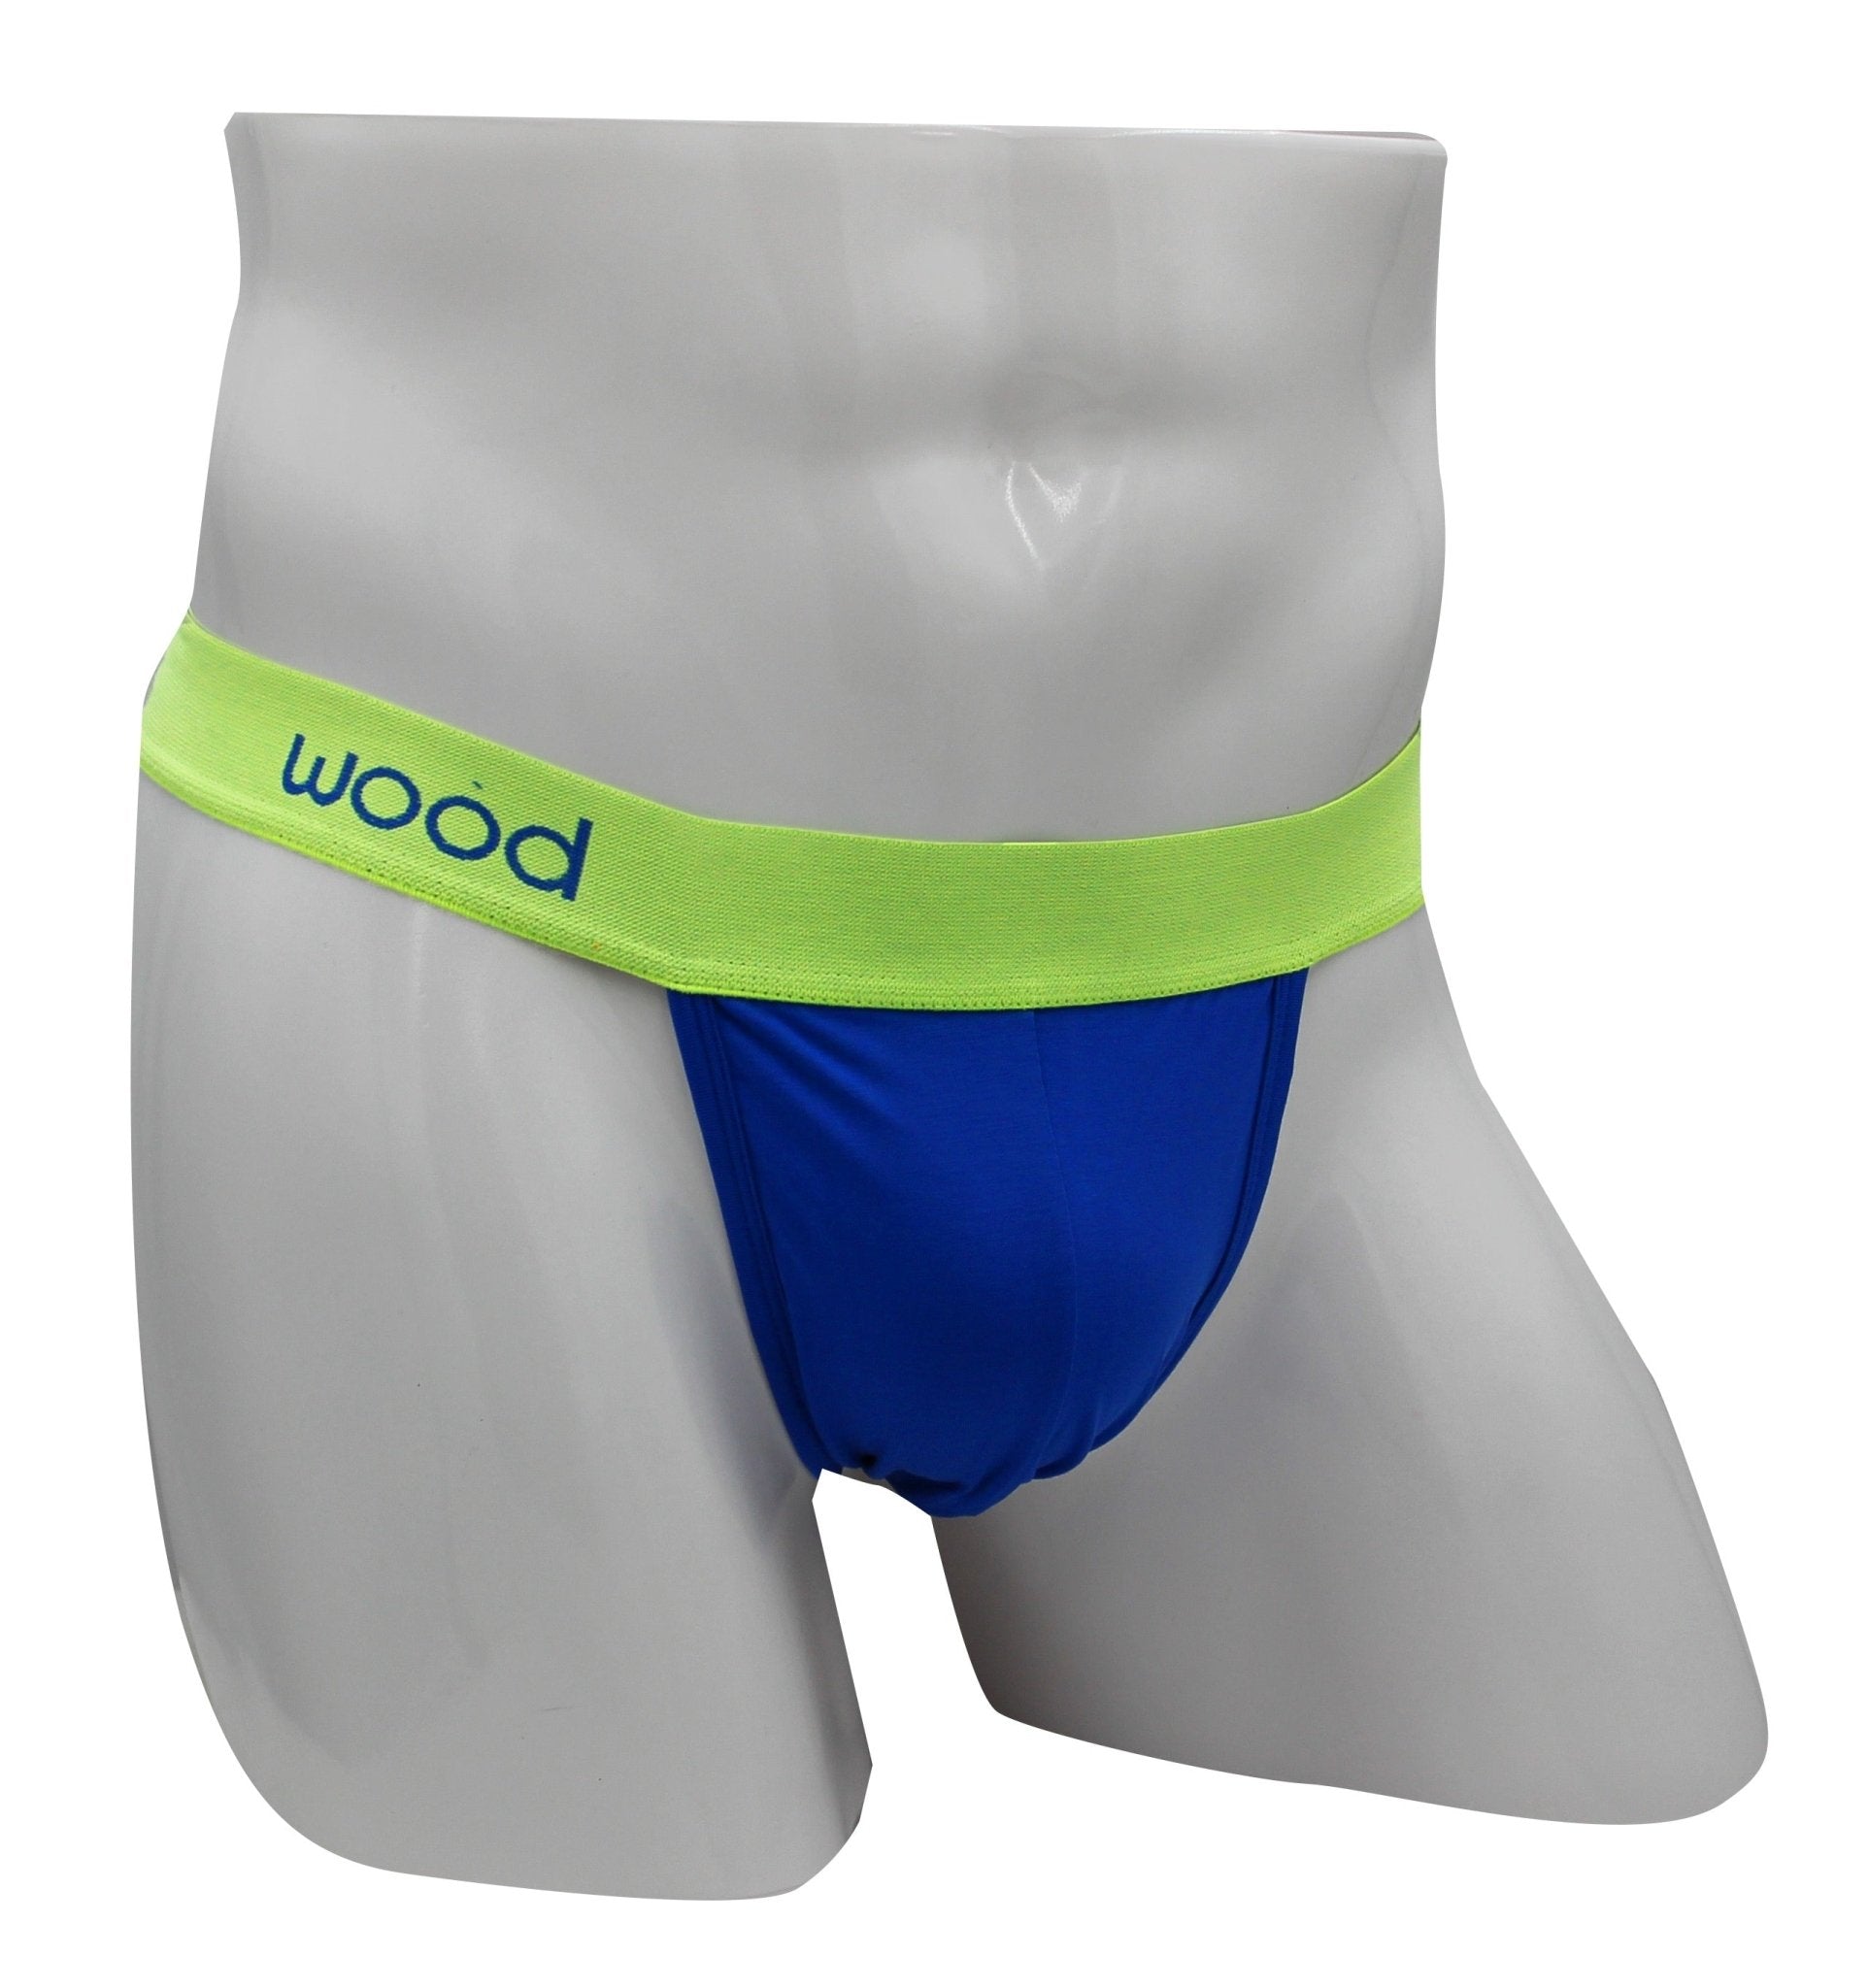 Men's Thong from Wood - Pinned Up Bra Lounge